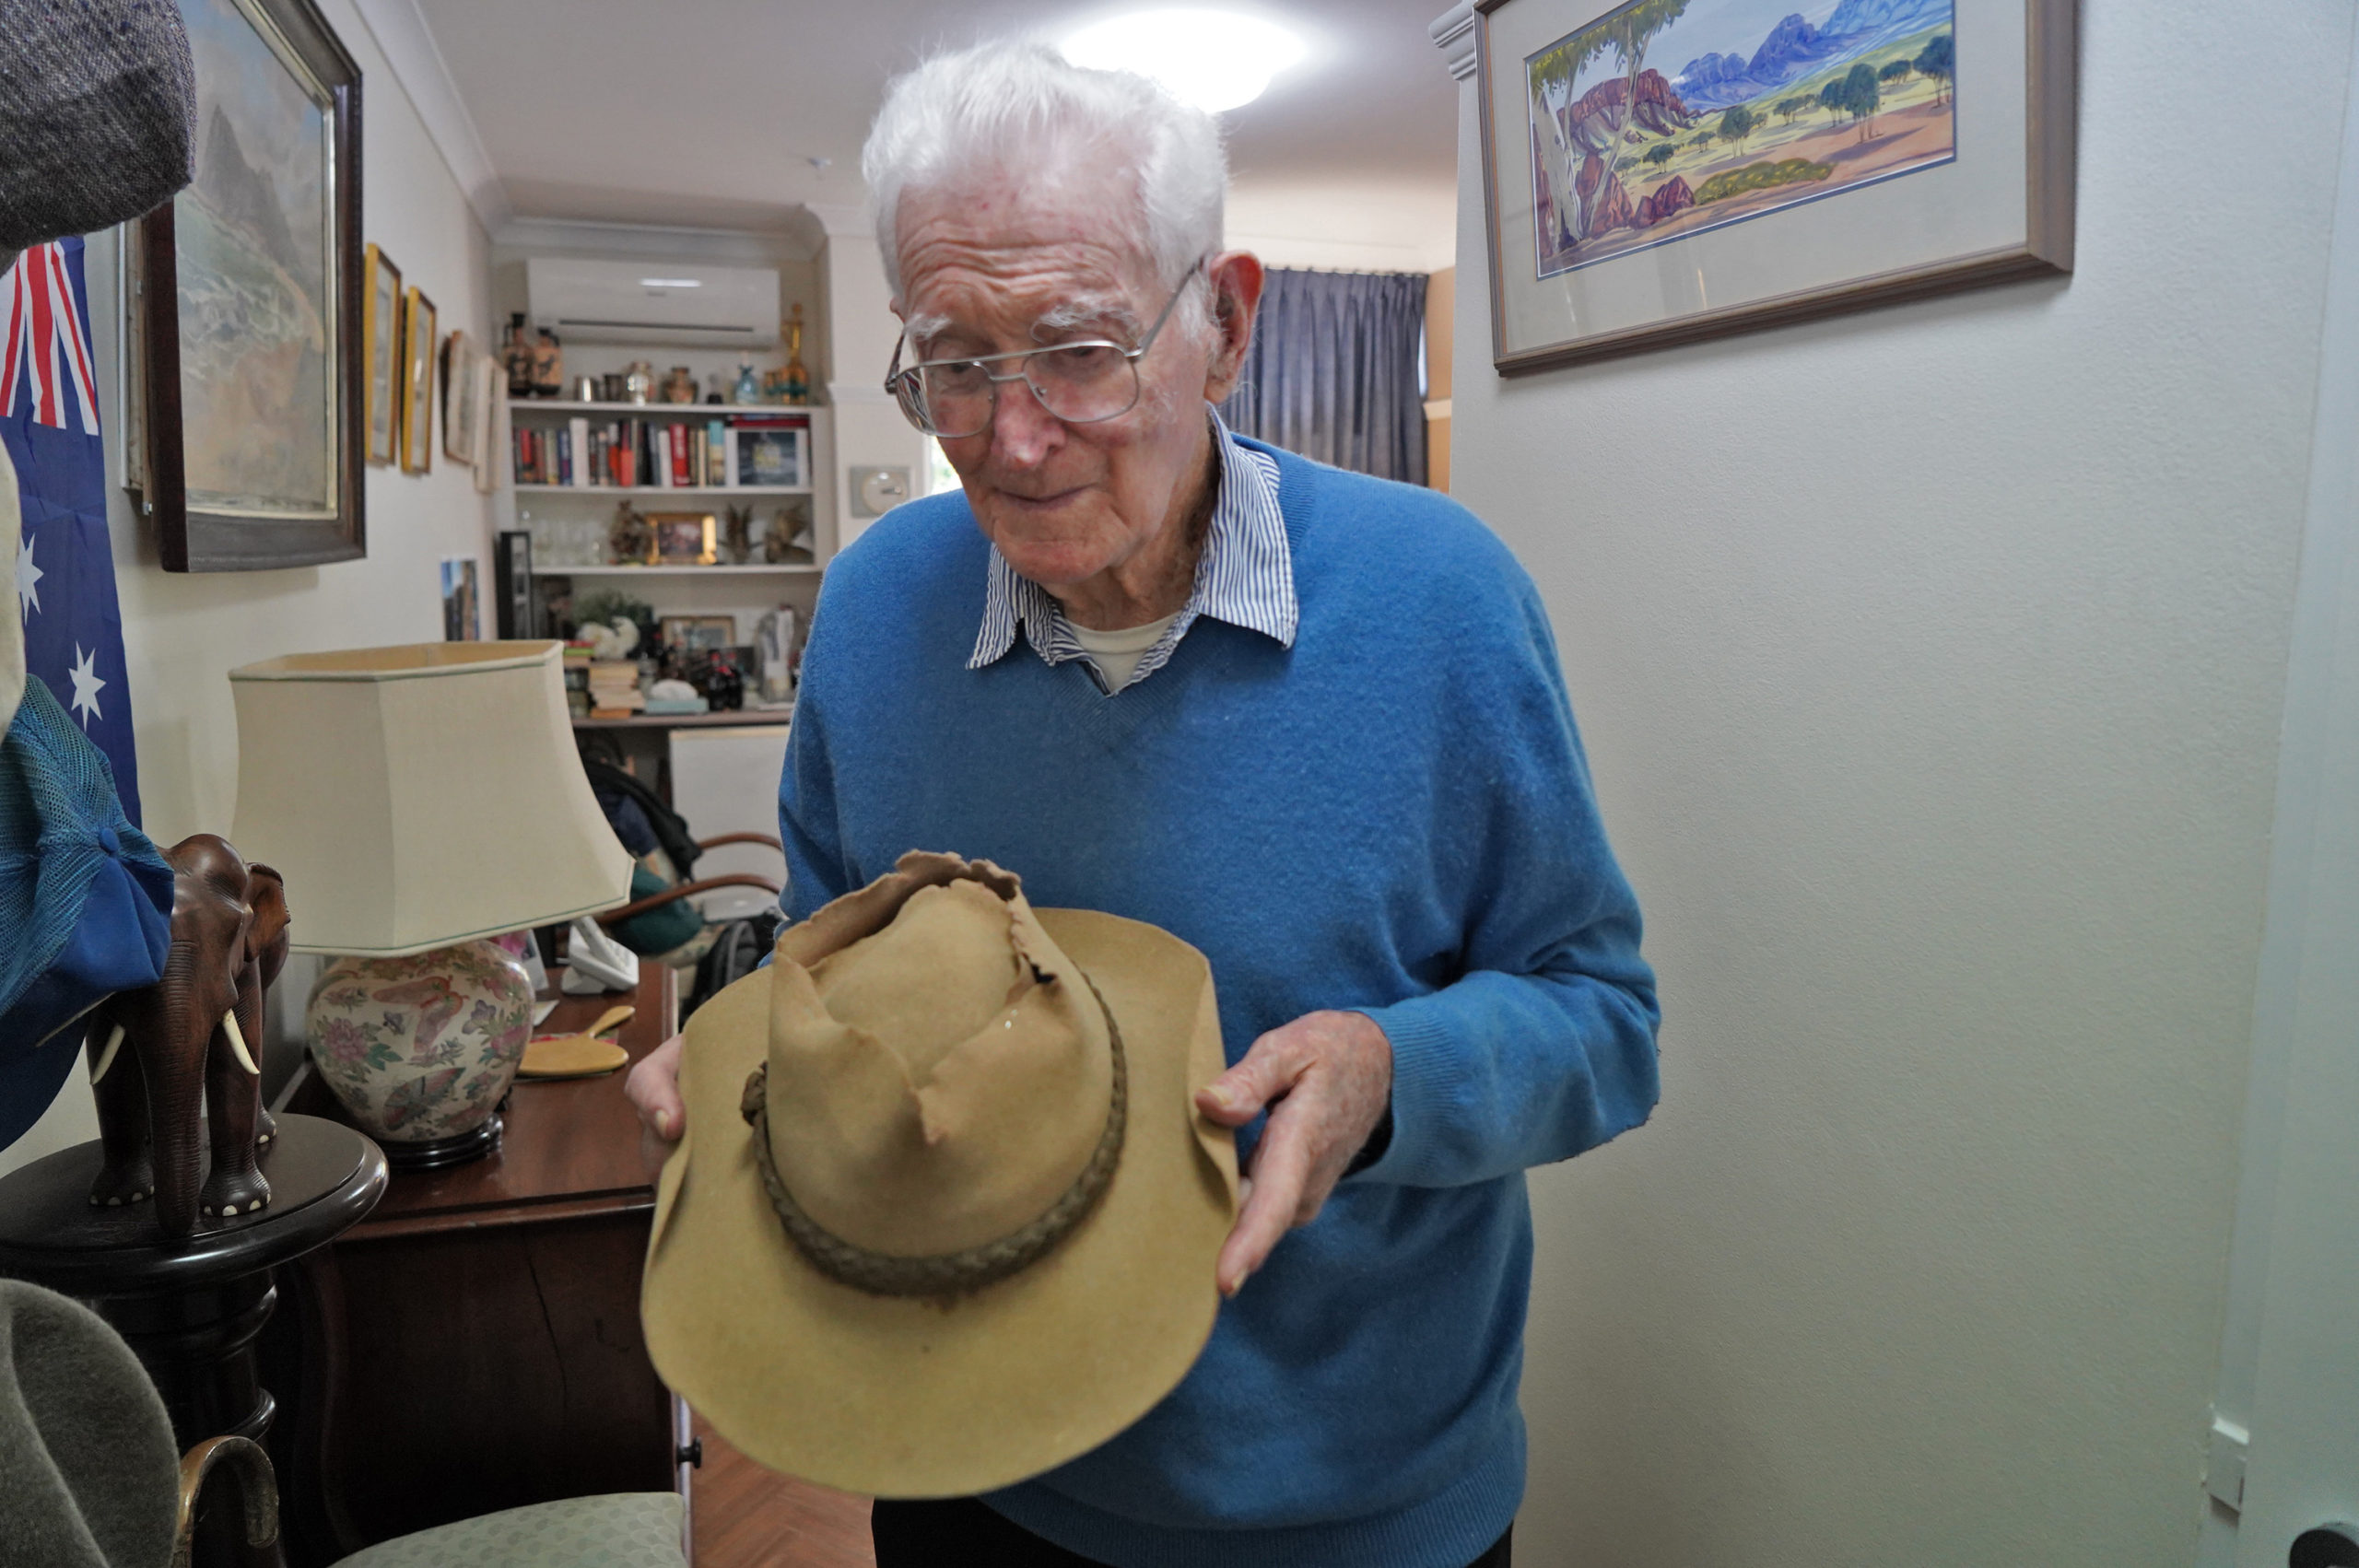 rod_kingham_with_hat_july20-scaled | RSL LifeCare - provide care and service to war veterans, retirement villages and accommodation, aged care services and assisted living